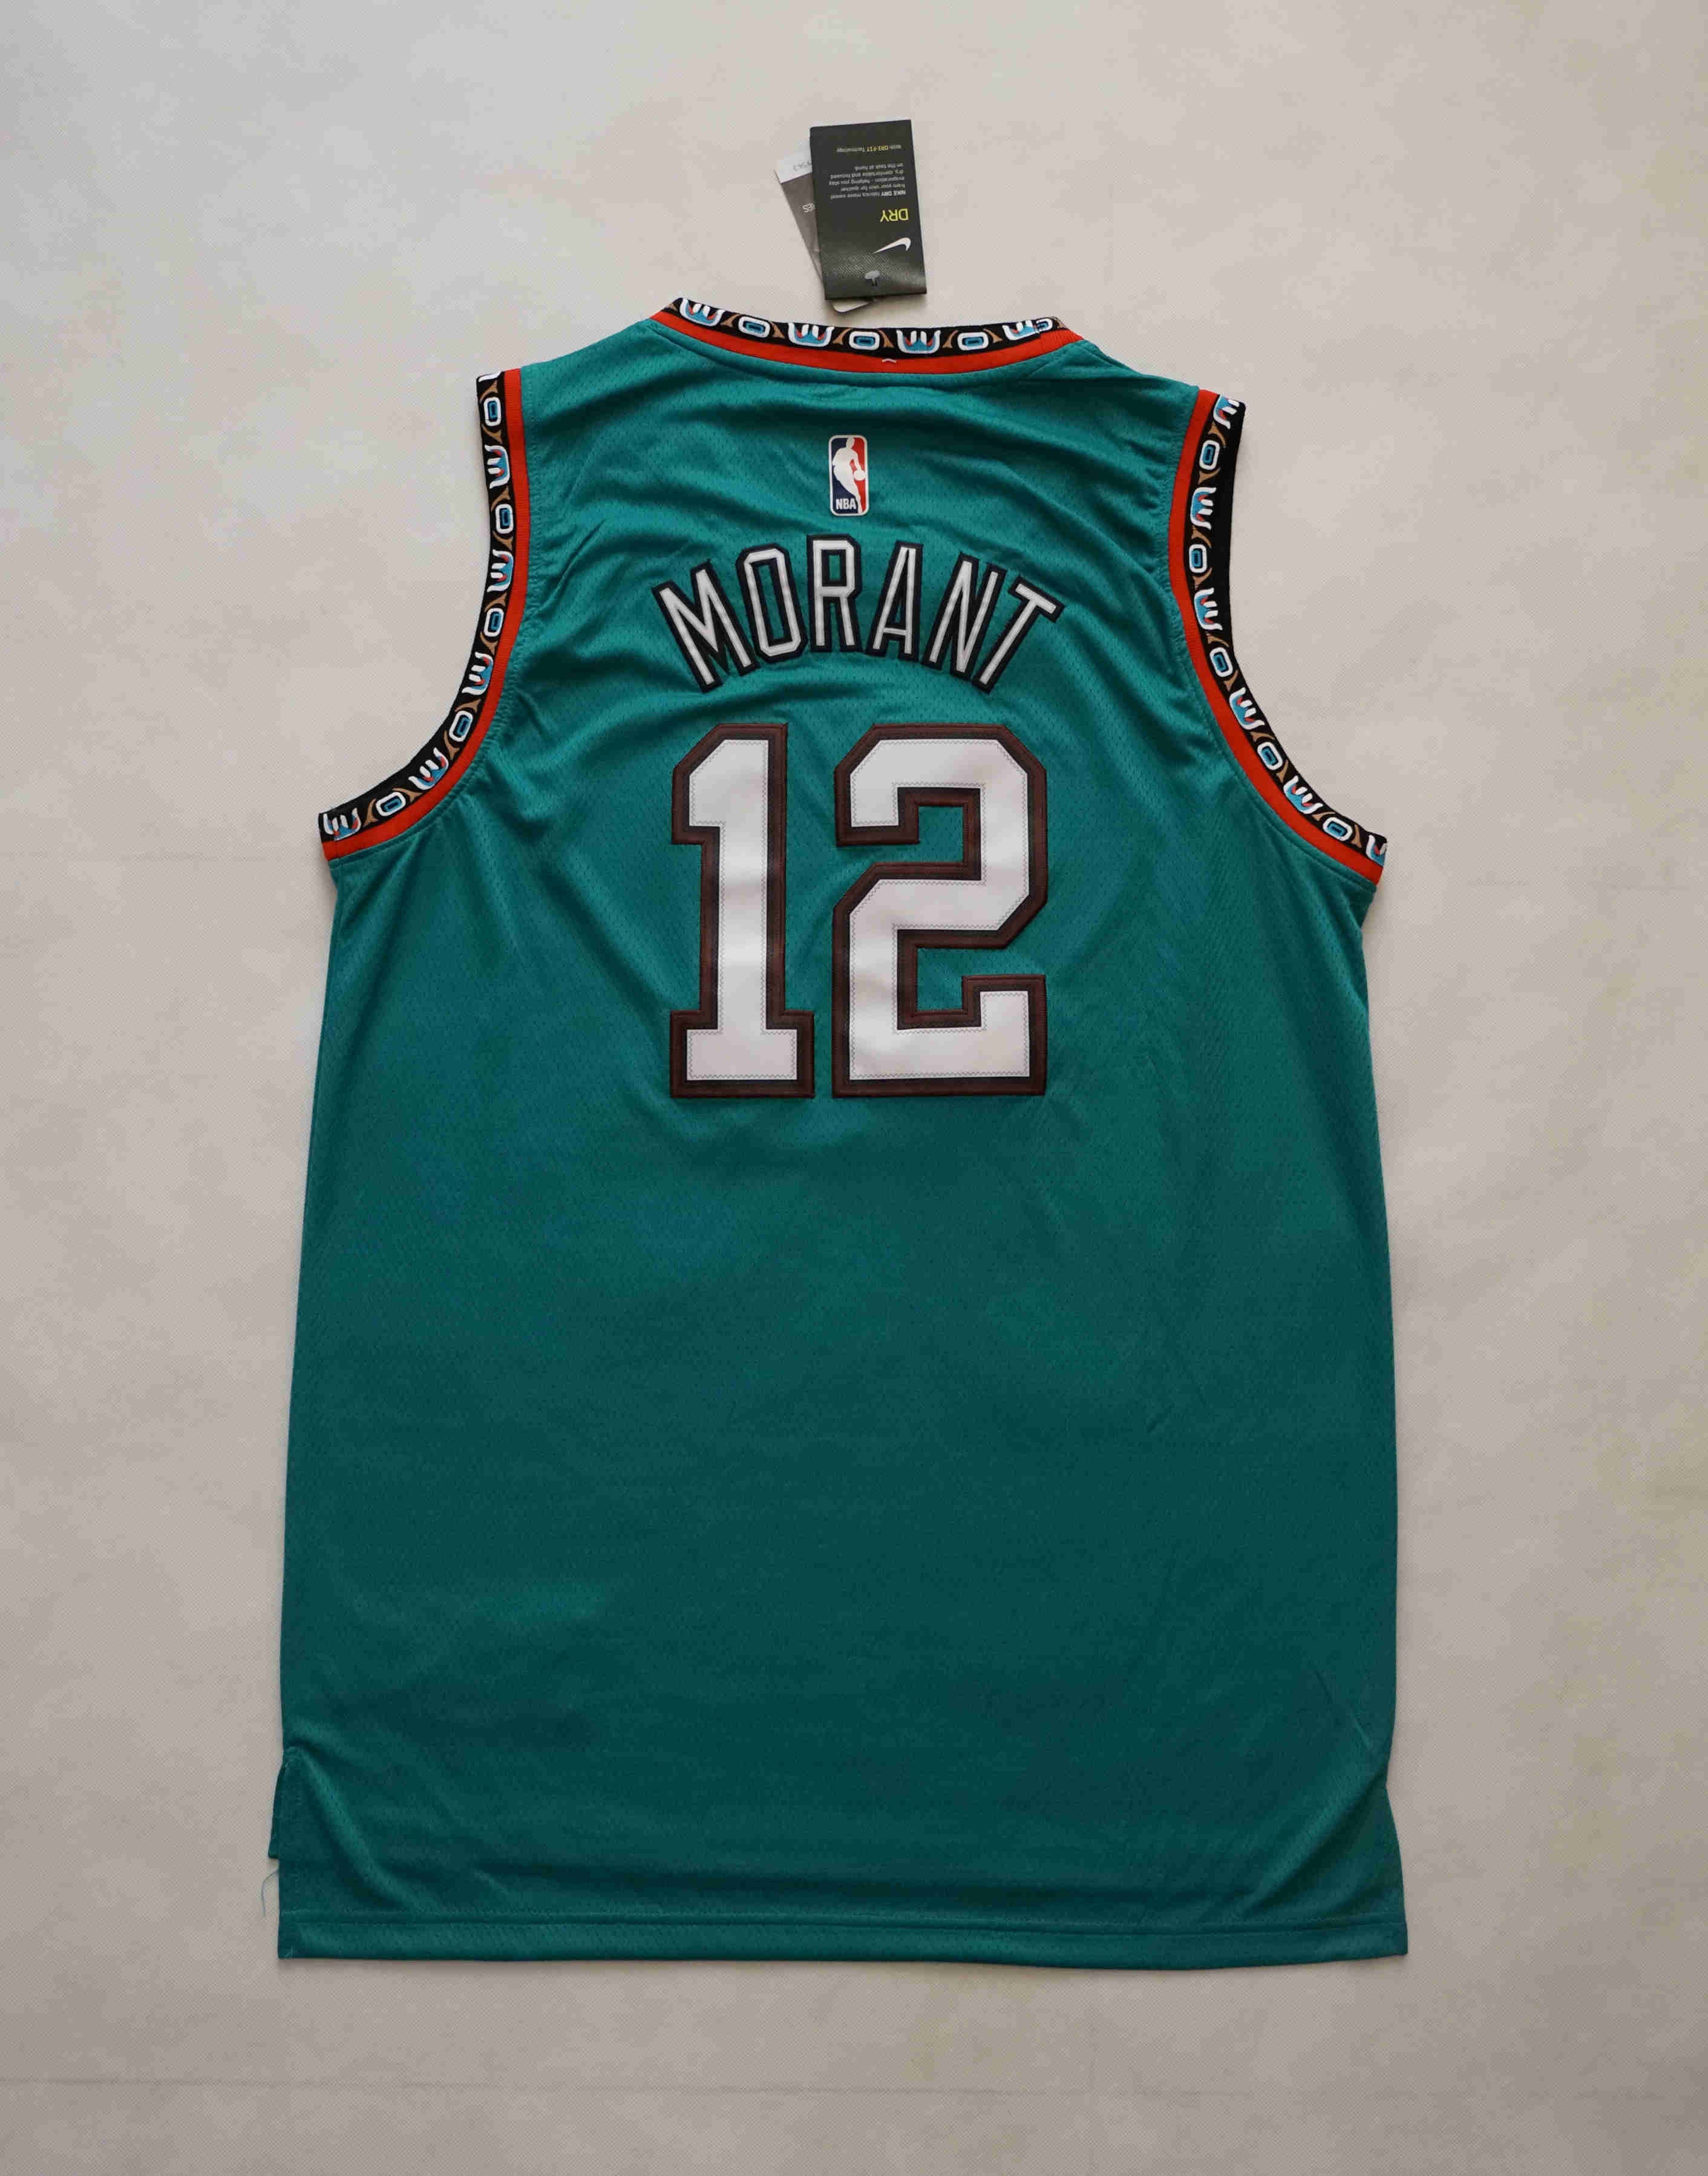 throwback morant jersey